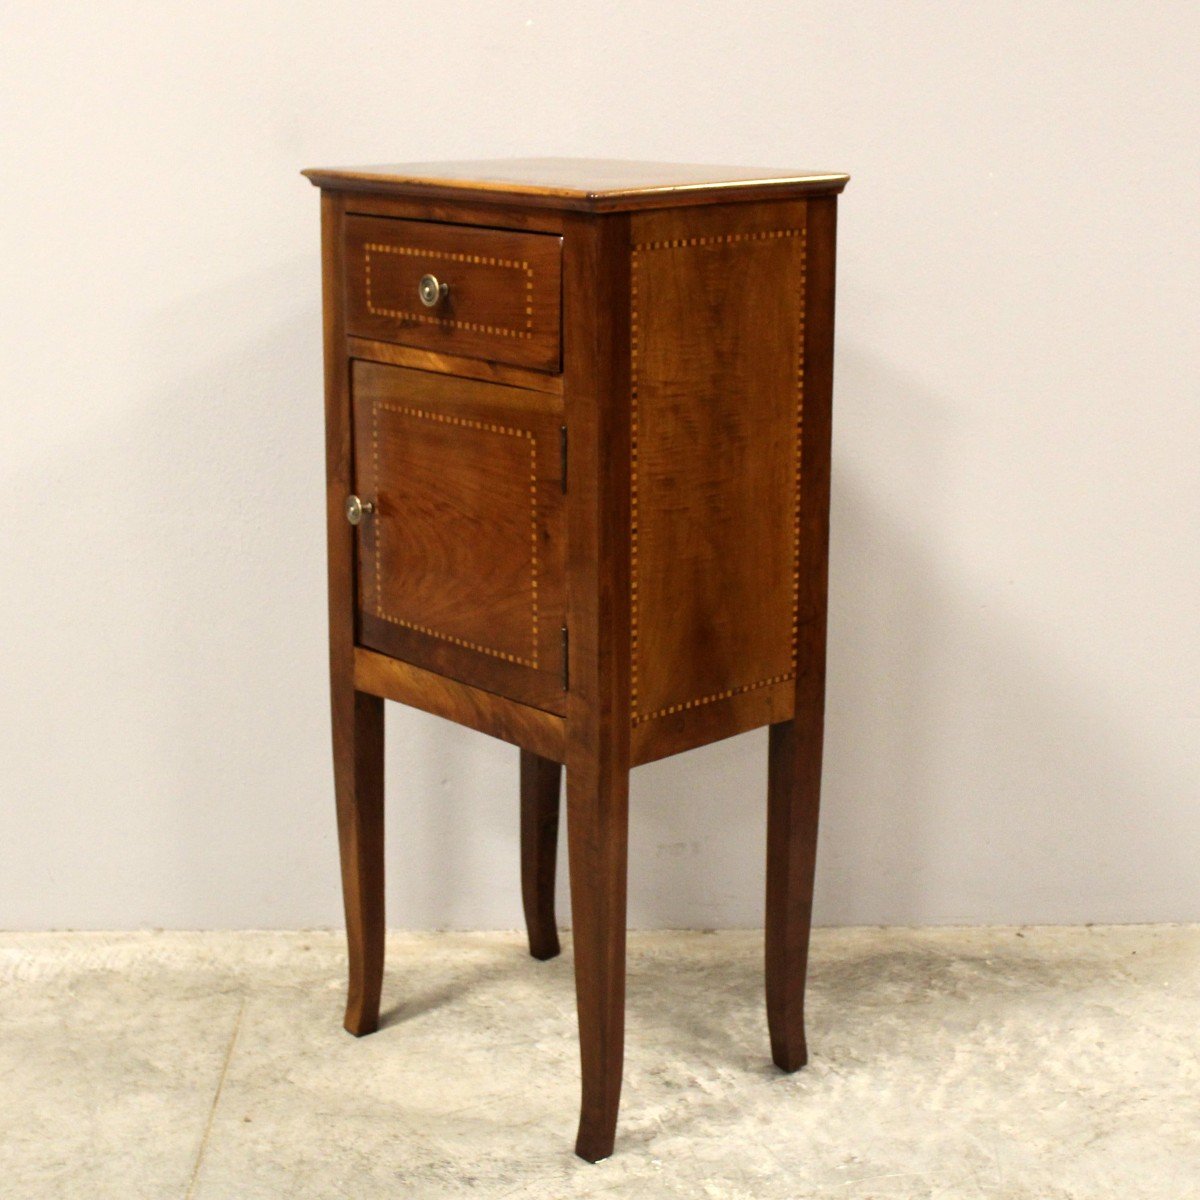 Antique Directoire Bedside Nightstand Table In Walnut And Marquetry - Italy 19th-photo-4